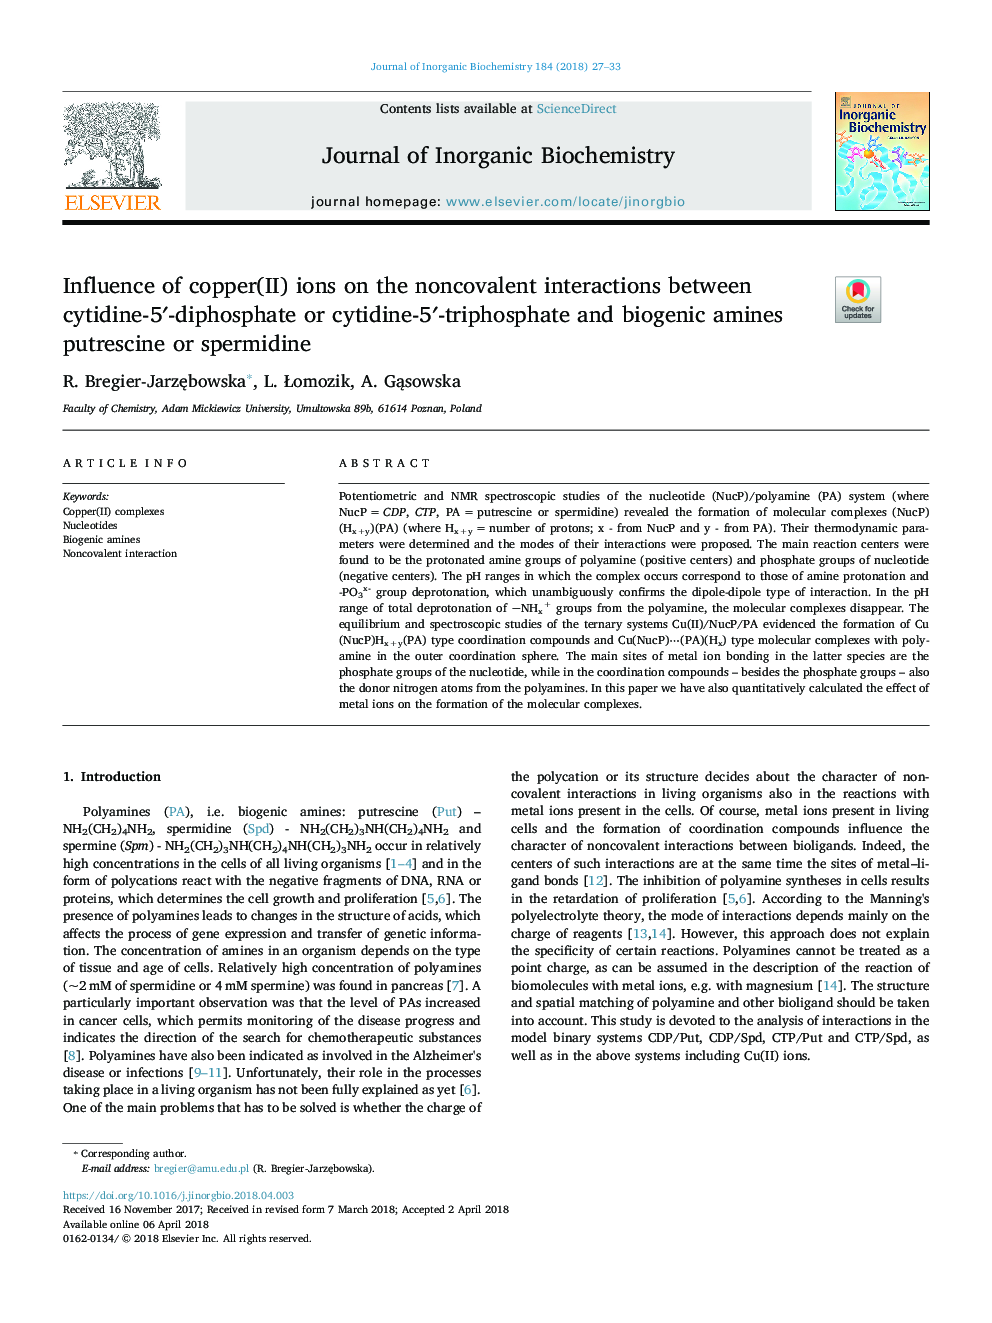 Influence of copper(II) ions on the noncovalent interactions between cytidine-5â²-diphosphate or cytidine-5â²-triphosphate and biogenic amines putrescine or spermidine